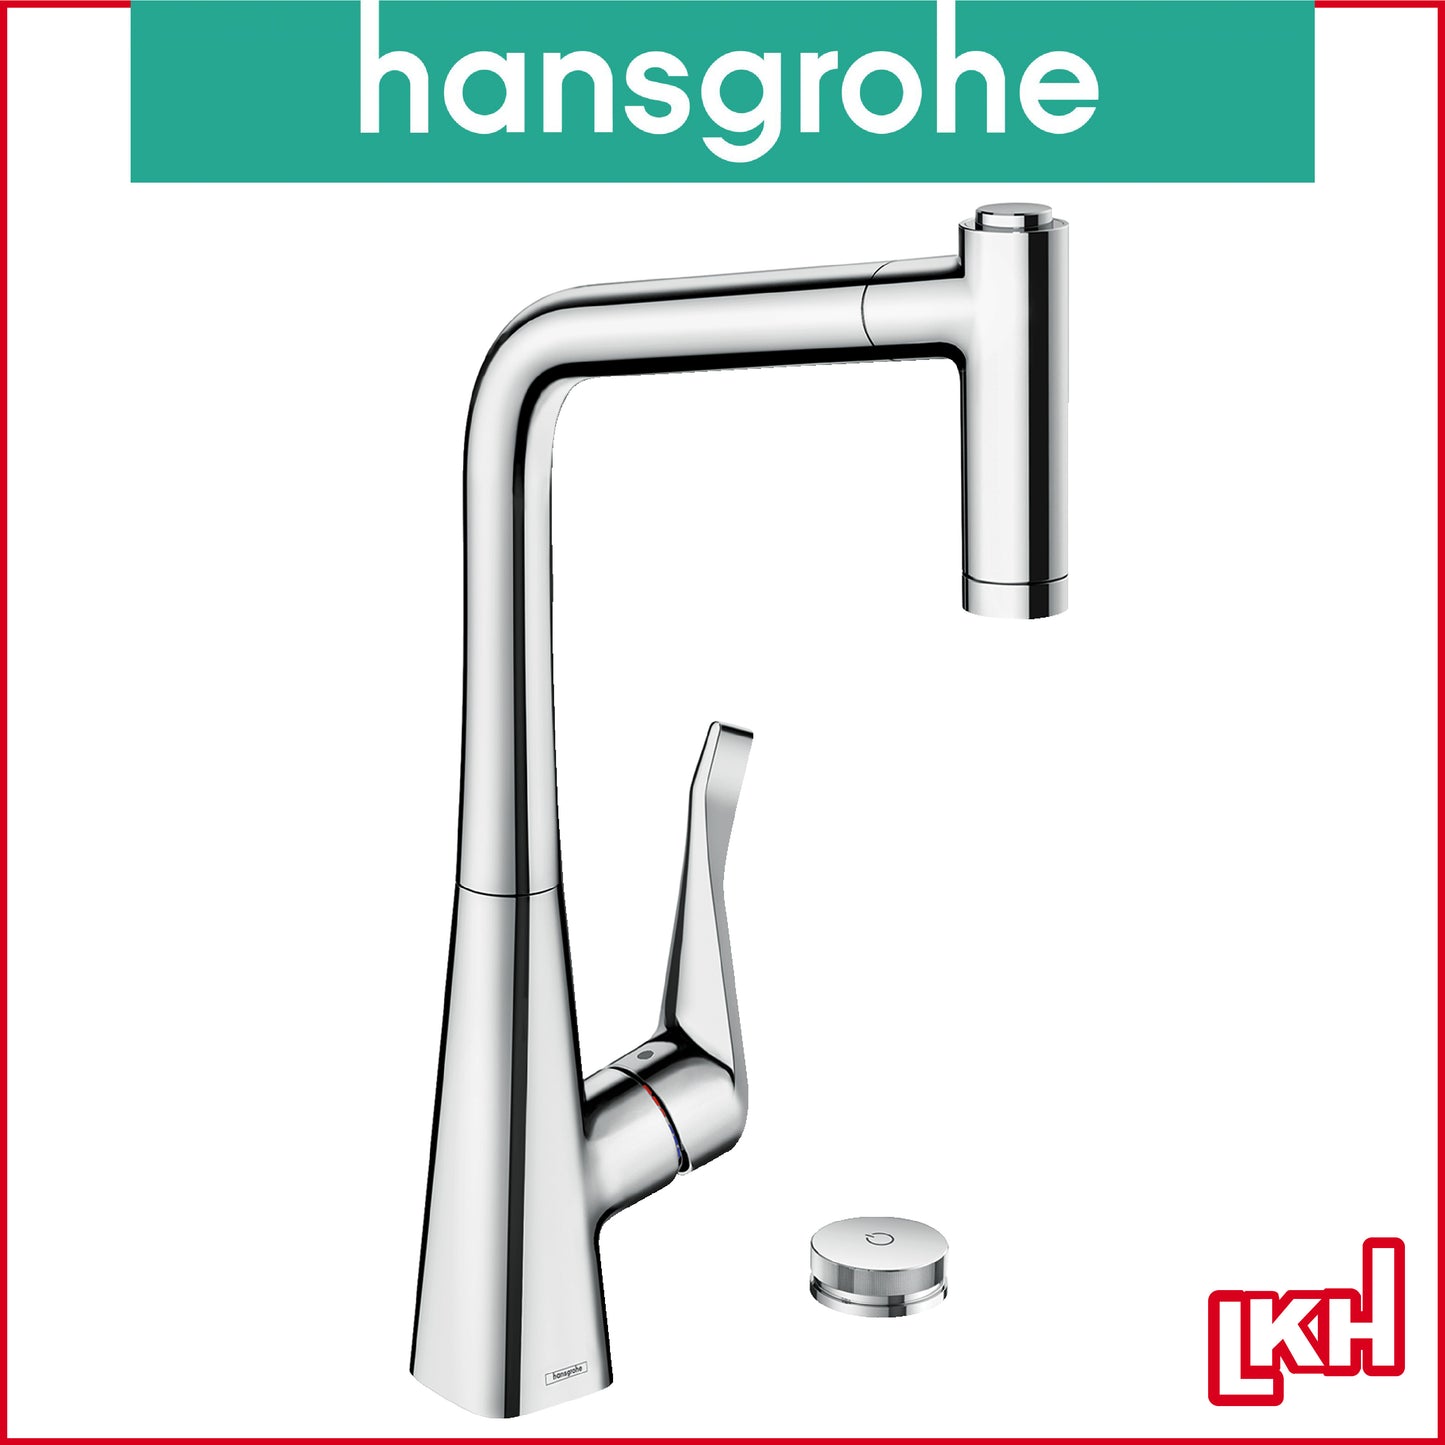 hansgrohe 73827000 pull out spray kitchen sink mixer